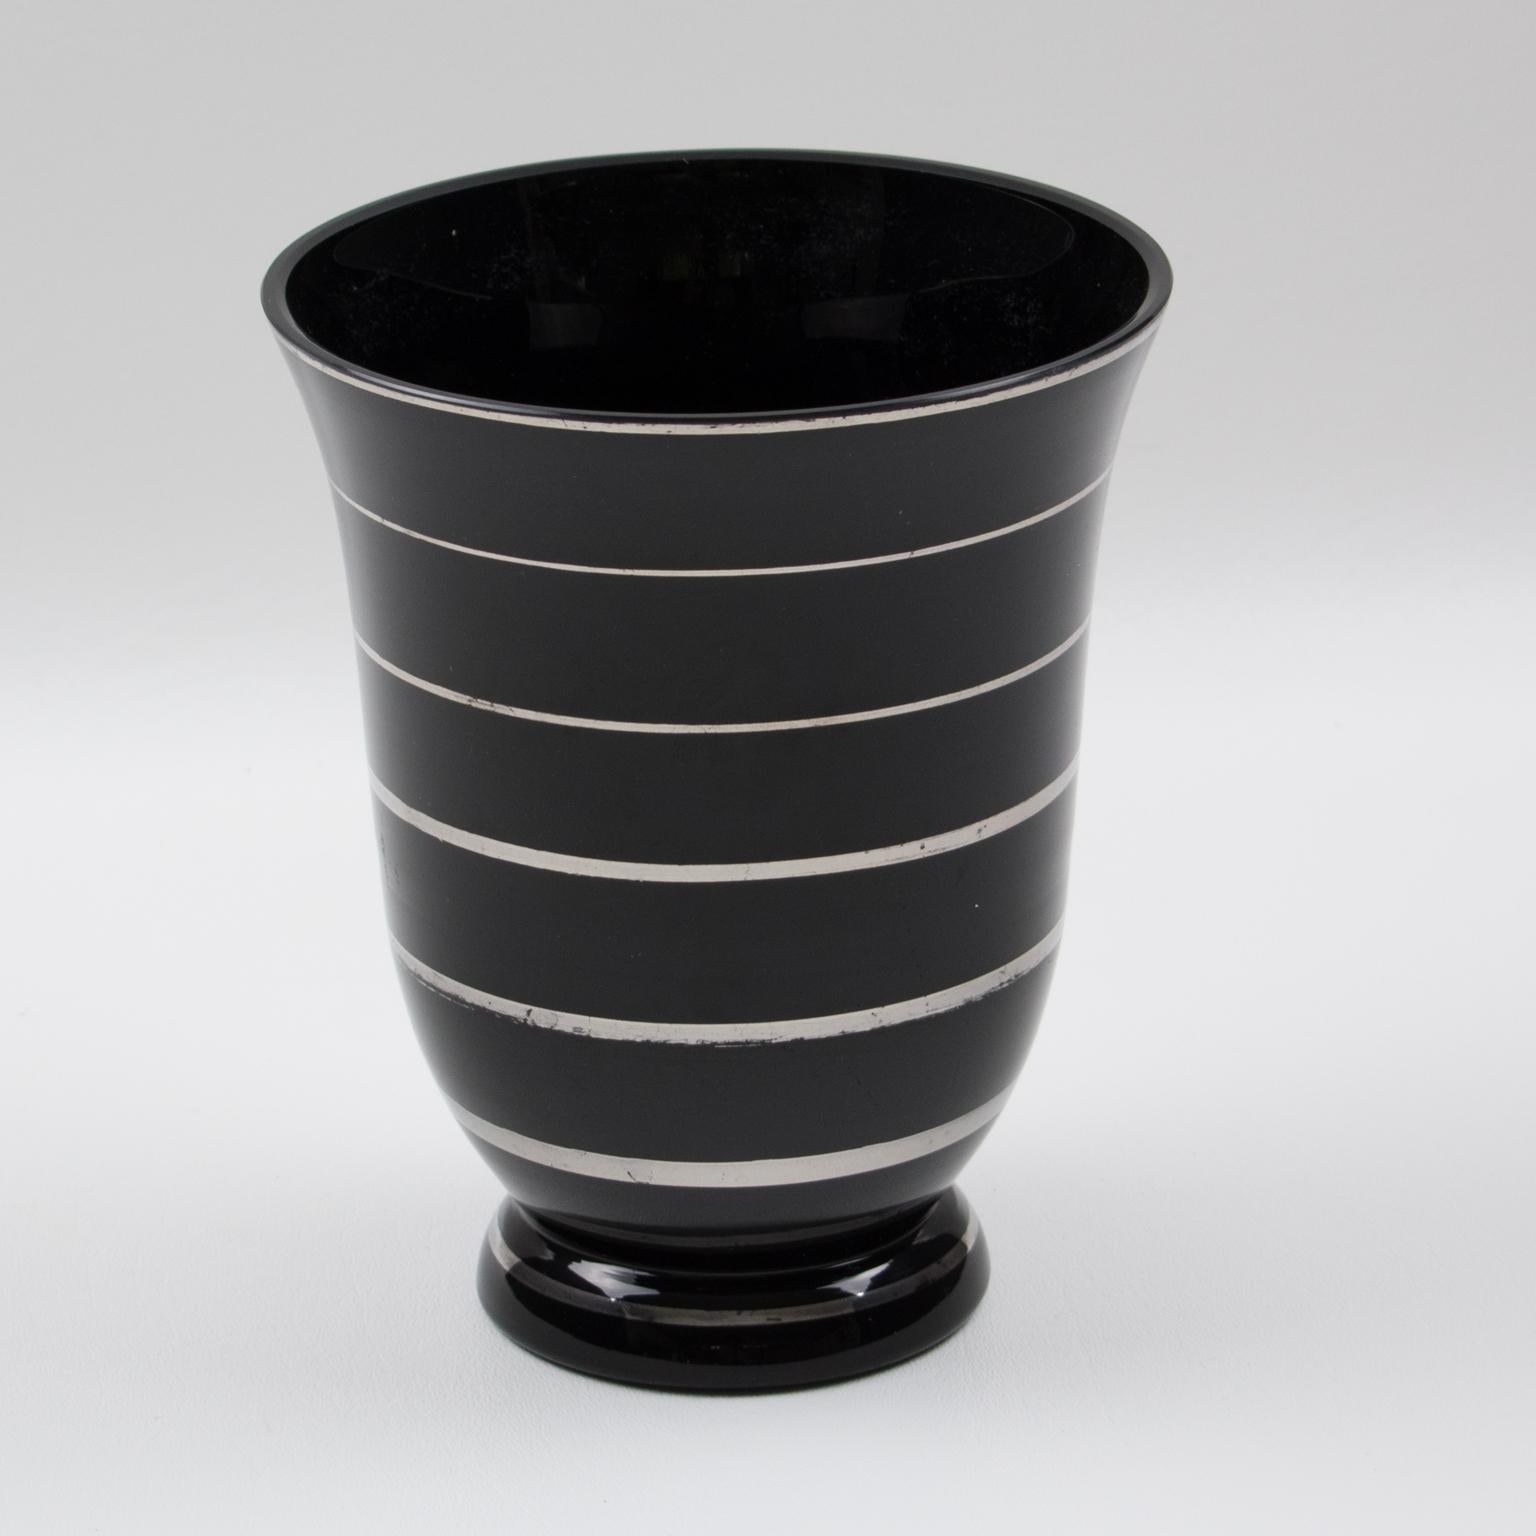 A nicely decorated 1930s French Art Deco black glass vase. Silver deposit decoration all round with striped pattern. Marked 